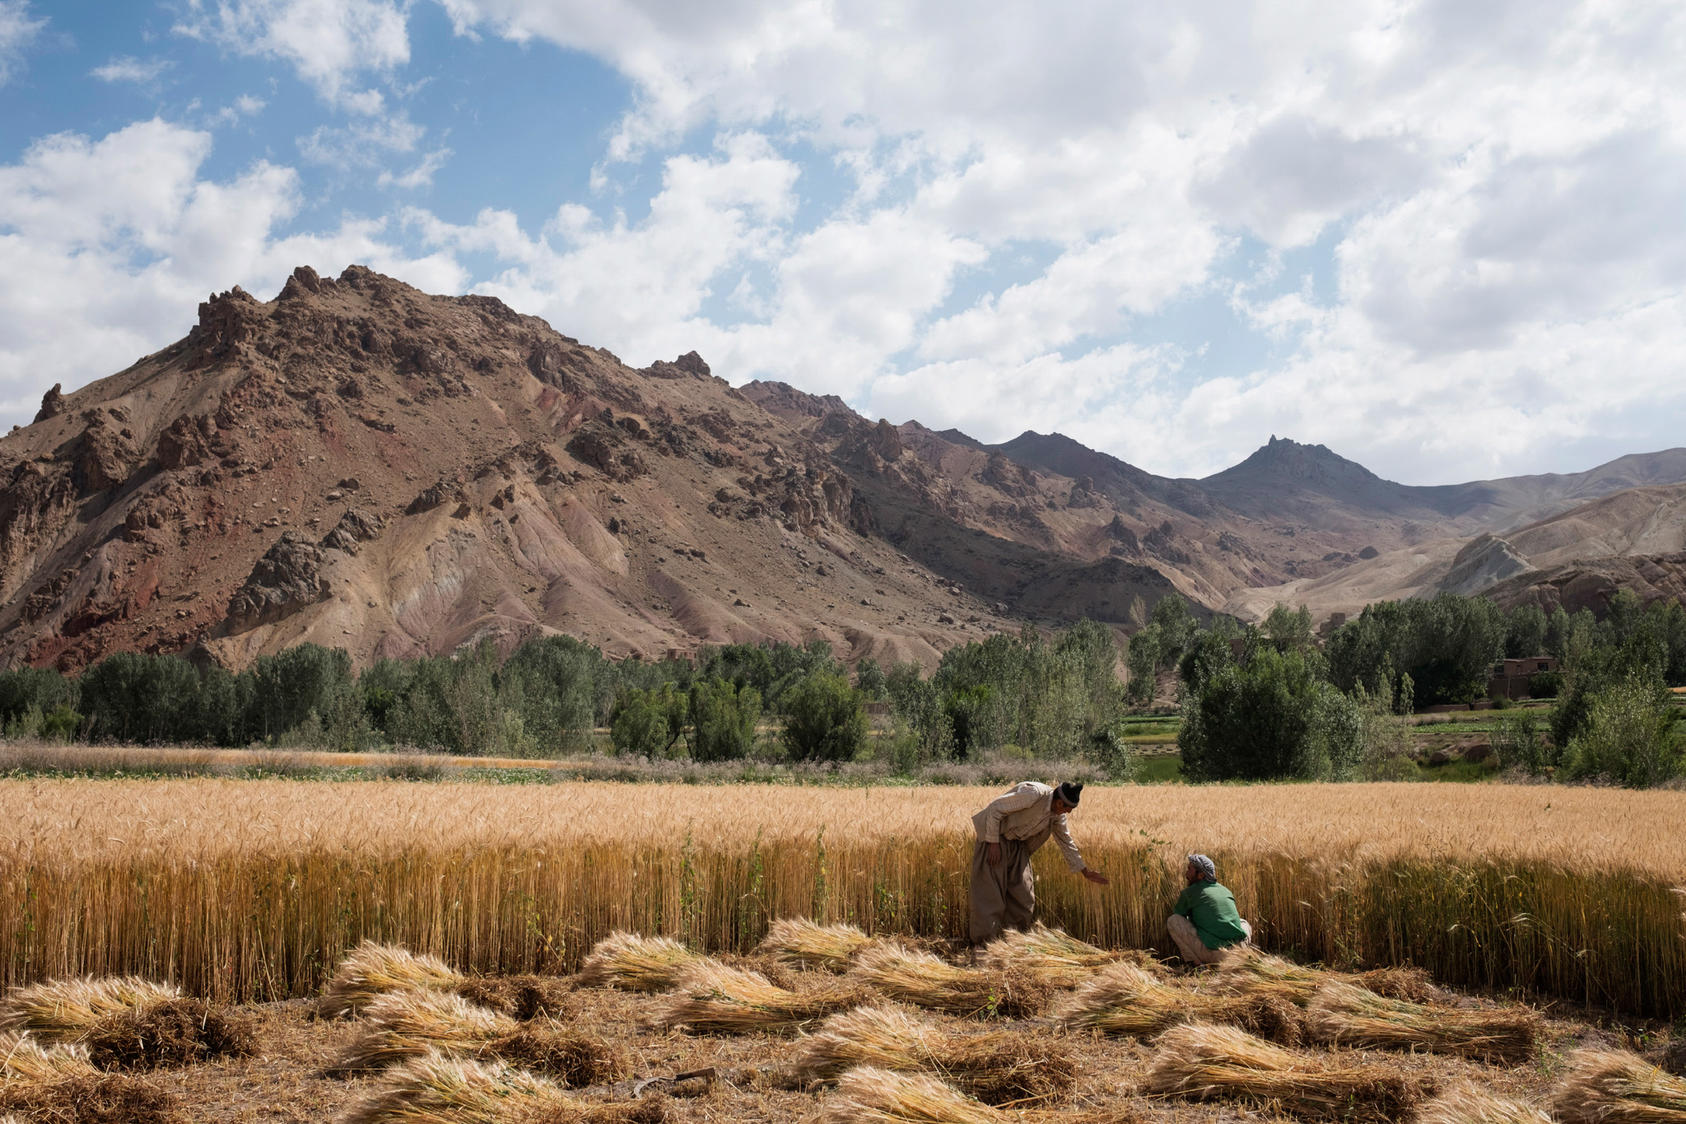 Farmers working in a field in the Shibar Valley, July 2016. The farmers’ unions in Afghanistan have helped ensure a more reliable and diverse food supply in an often famine-struck region, while also empowering its female leadership. Photo Courtesy of The New York Times/Adam Ferguson